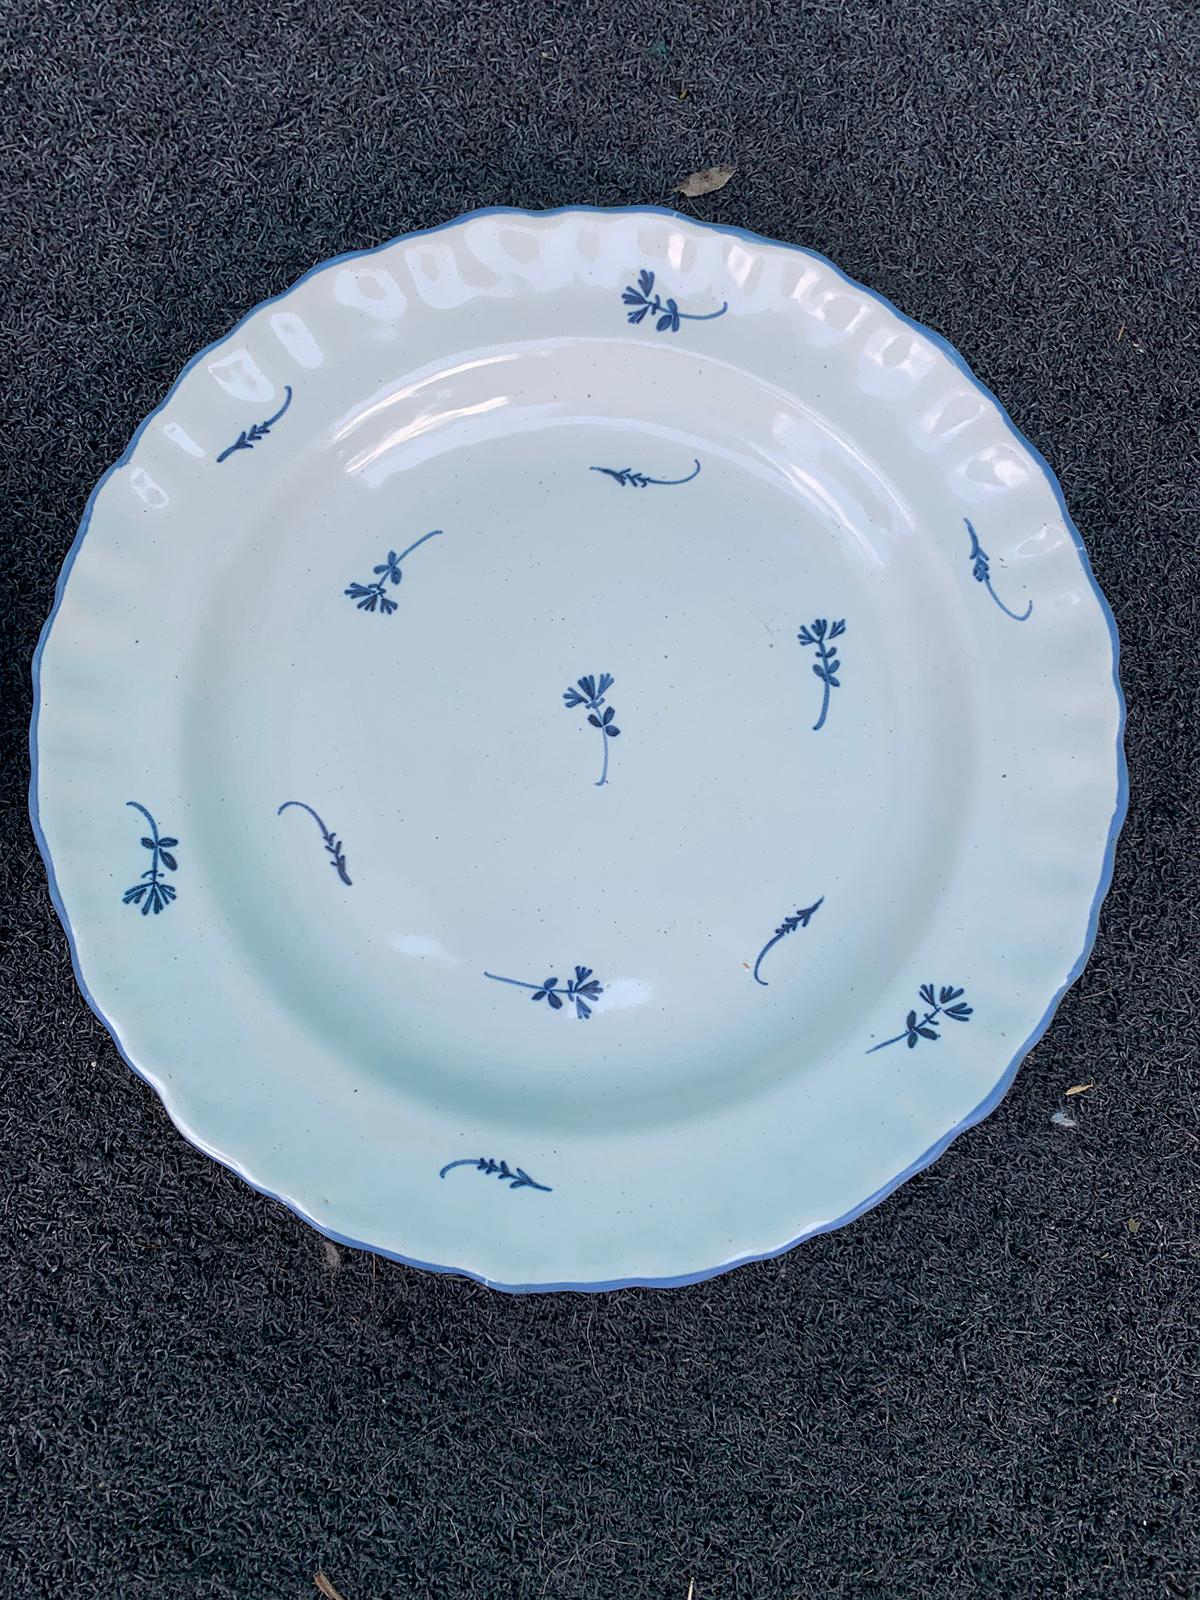 Pair of 20th Century French Faience Porcelain Plates For Sale 6